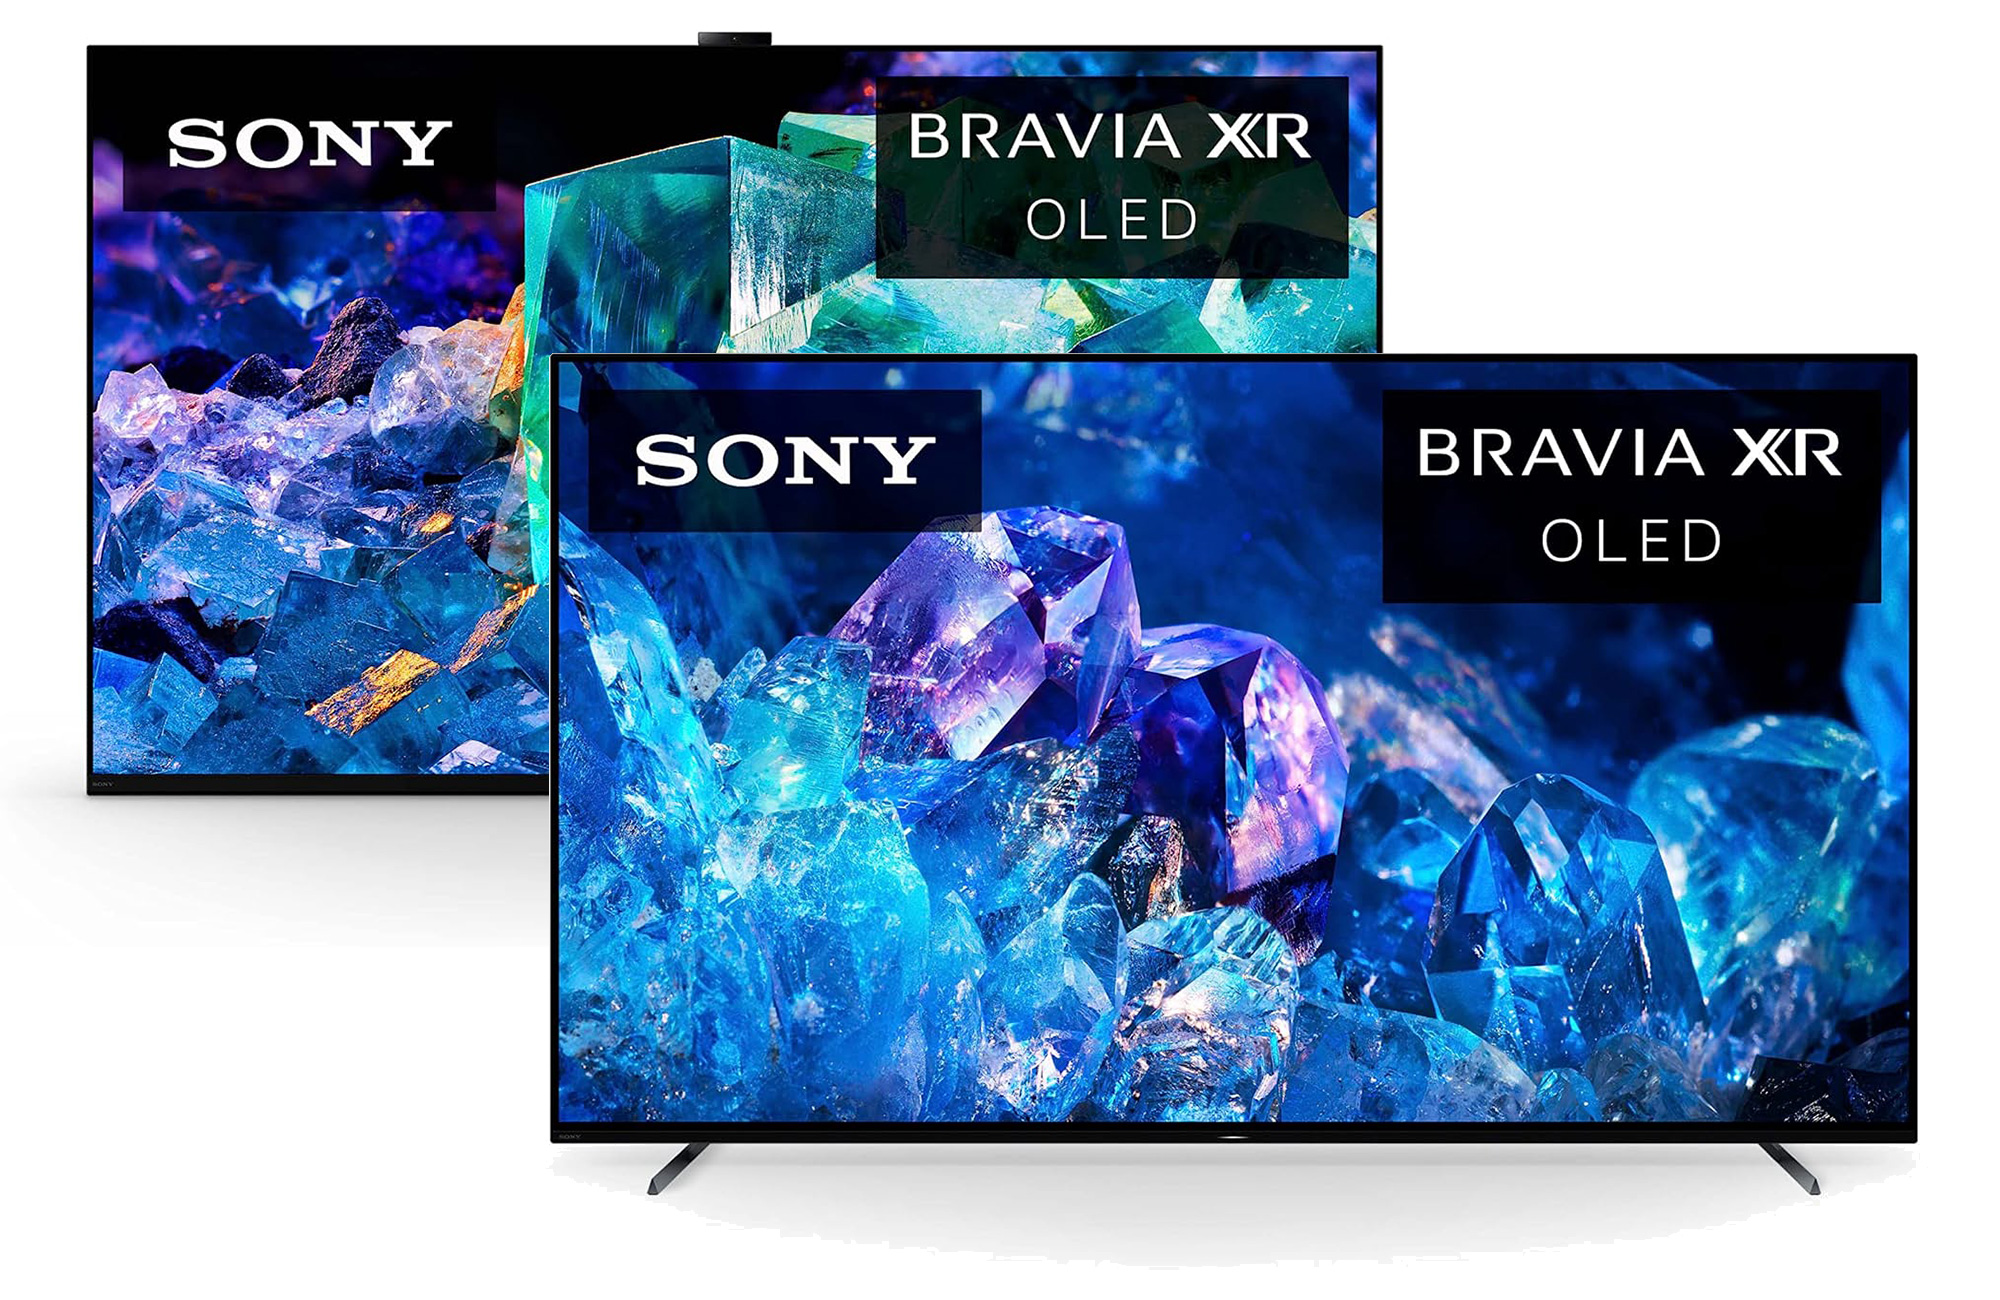 Save up to $1,000 on Sony OLED TVs during Amazon Prime Early Access